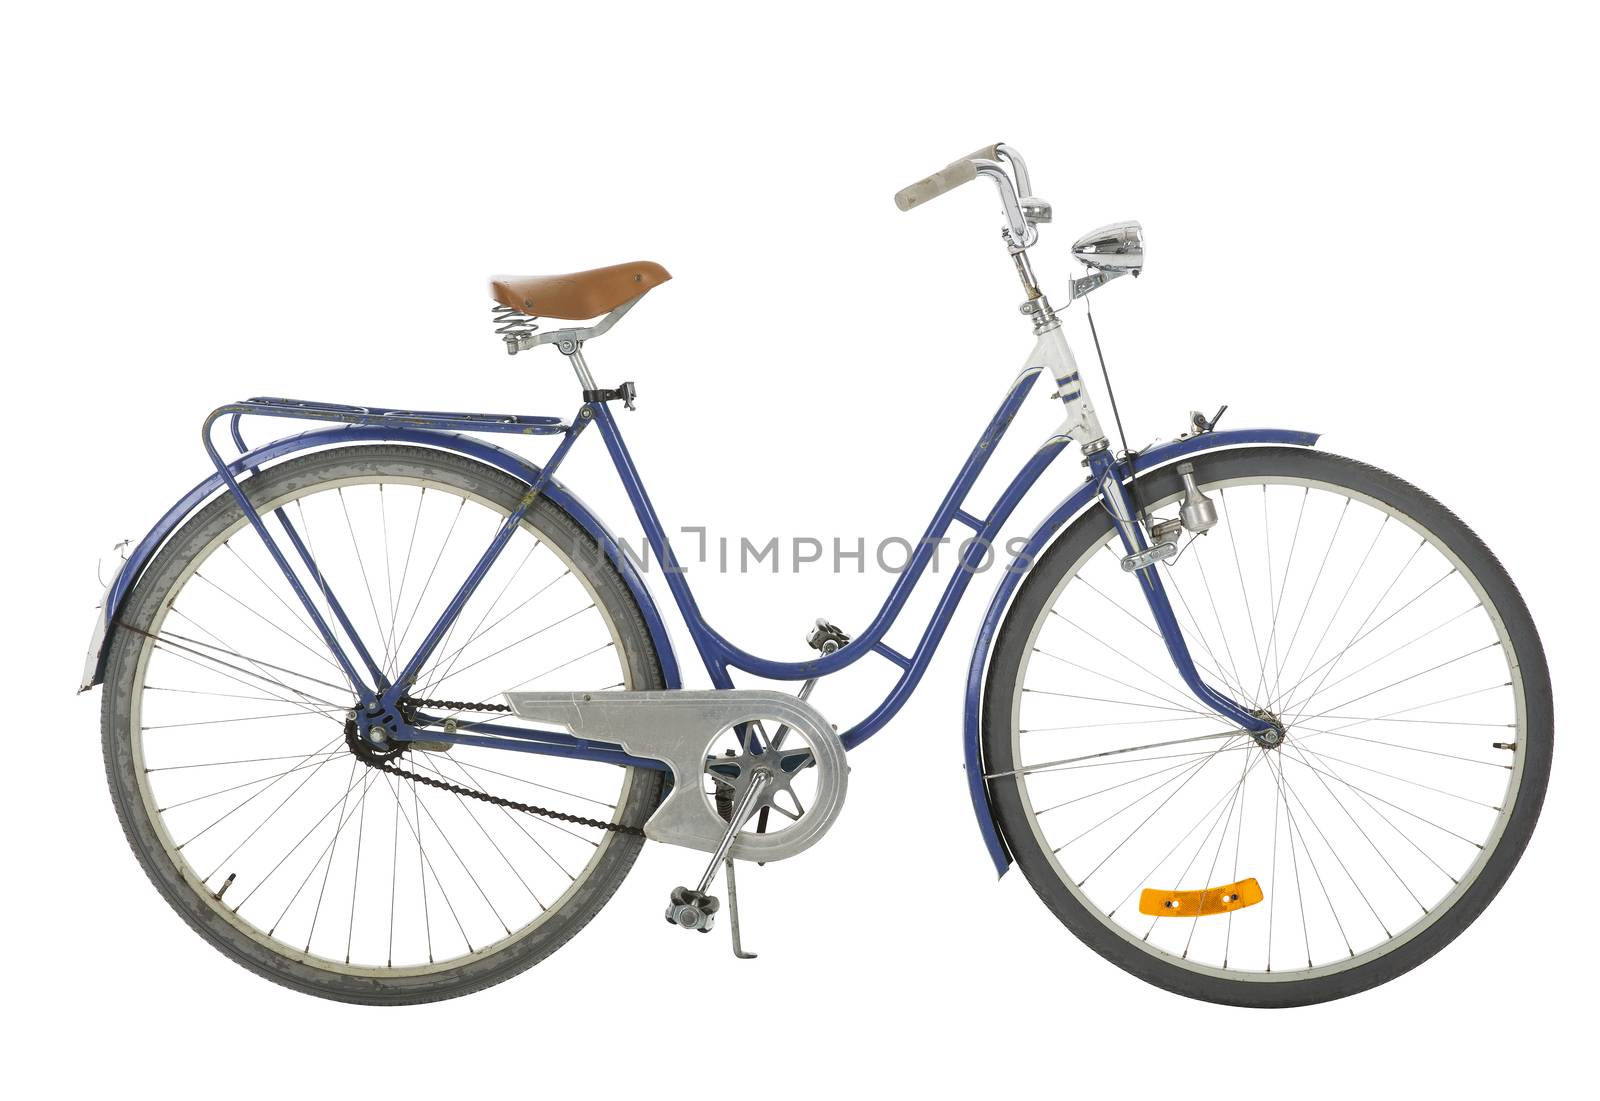 Blue Old fashioned bicycle by gemenacom